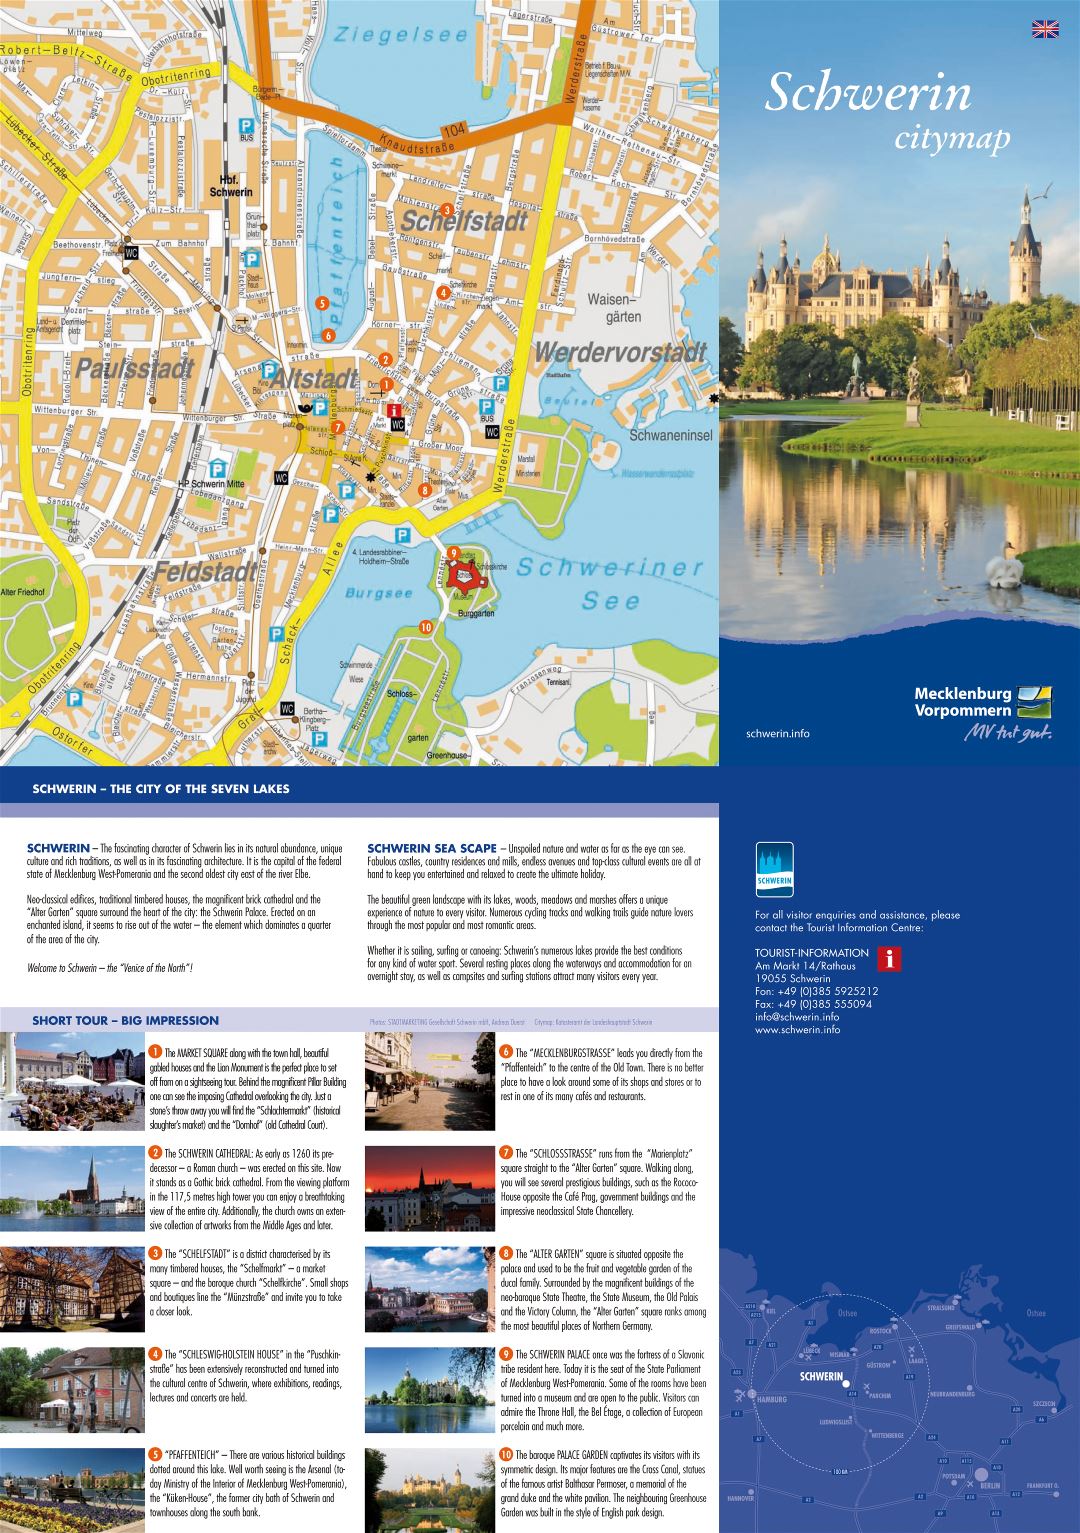 Large detailed tourist map of central part of Schwerin city